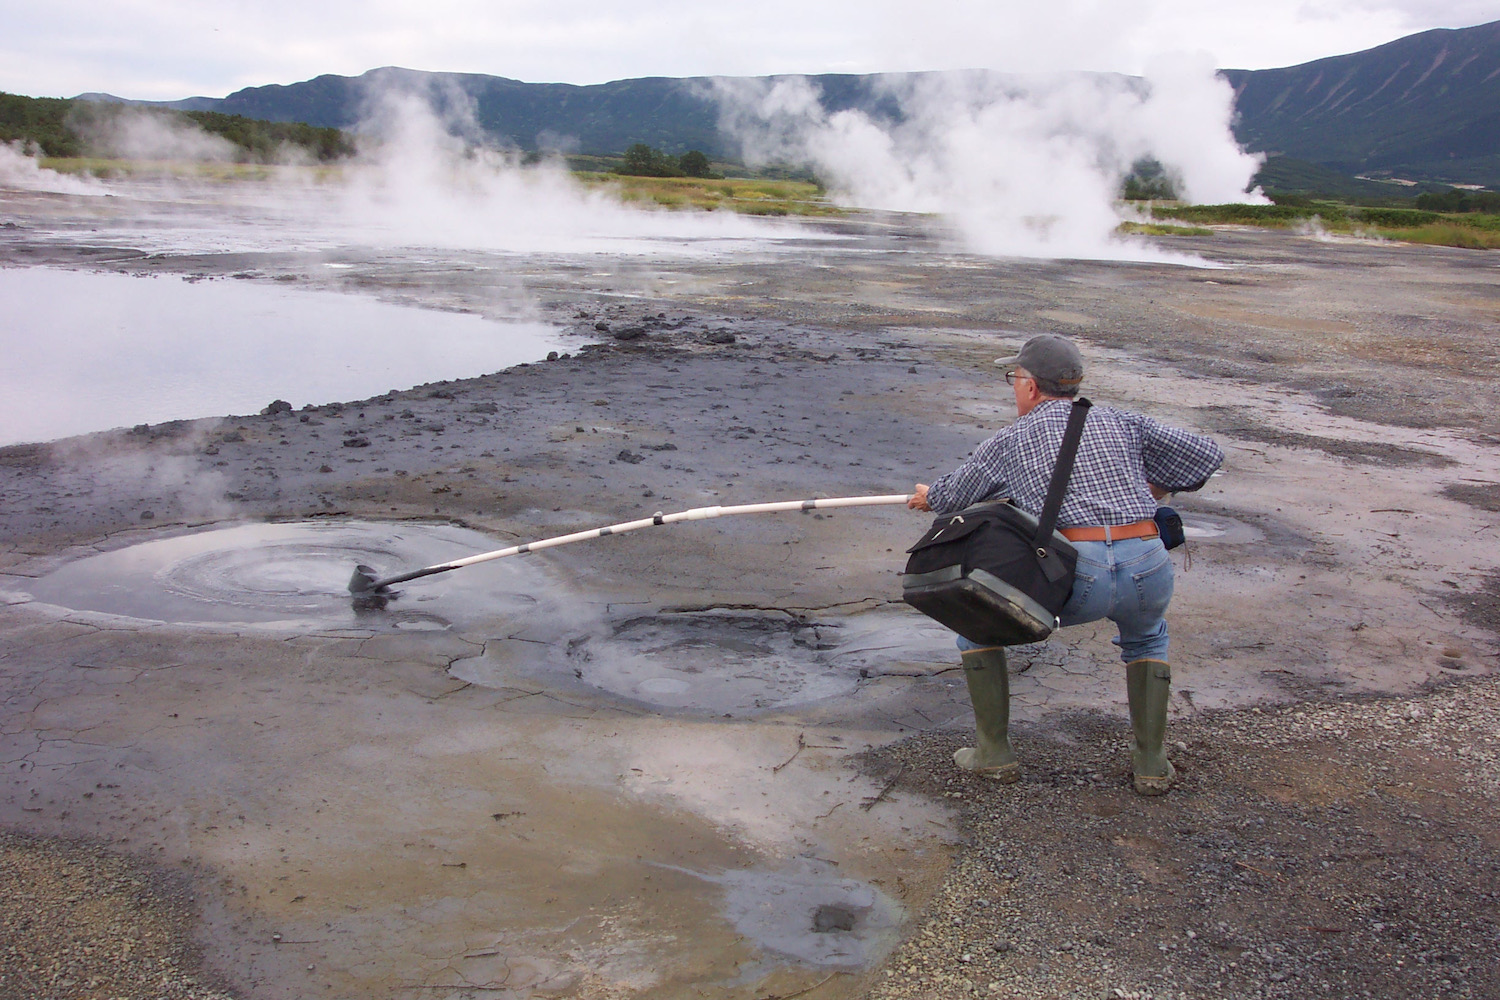 Tamas Torok collecting field samples in the Uzon Caldera, a volcanic environment located on the Kamchatka Peninsula in the Russian Far East, to find extremophiles.